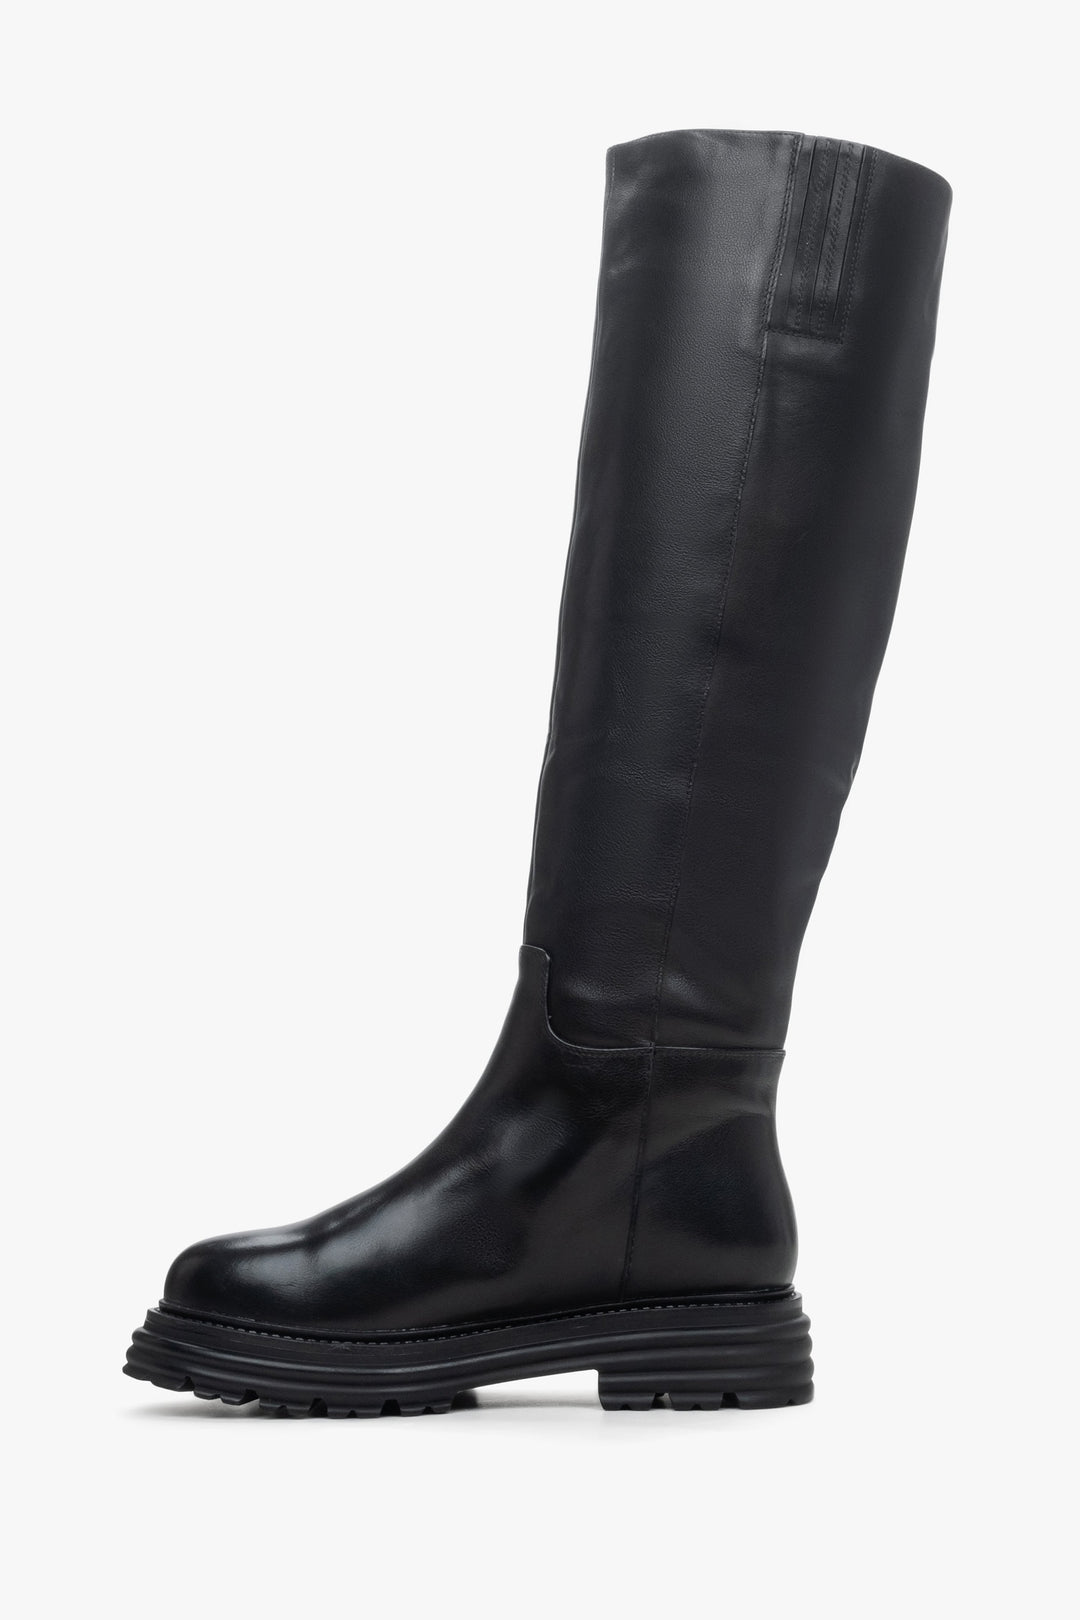 Women's black leather knee-high boots with wide calf - shoe profile.